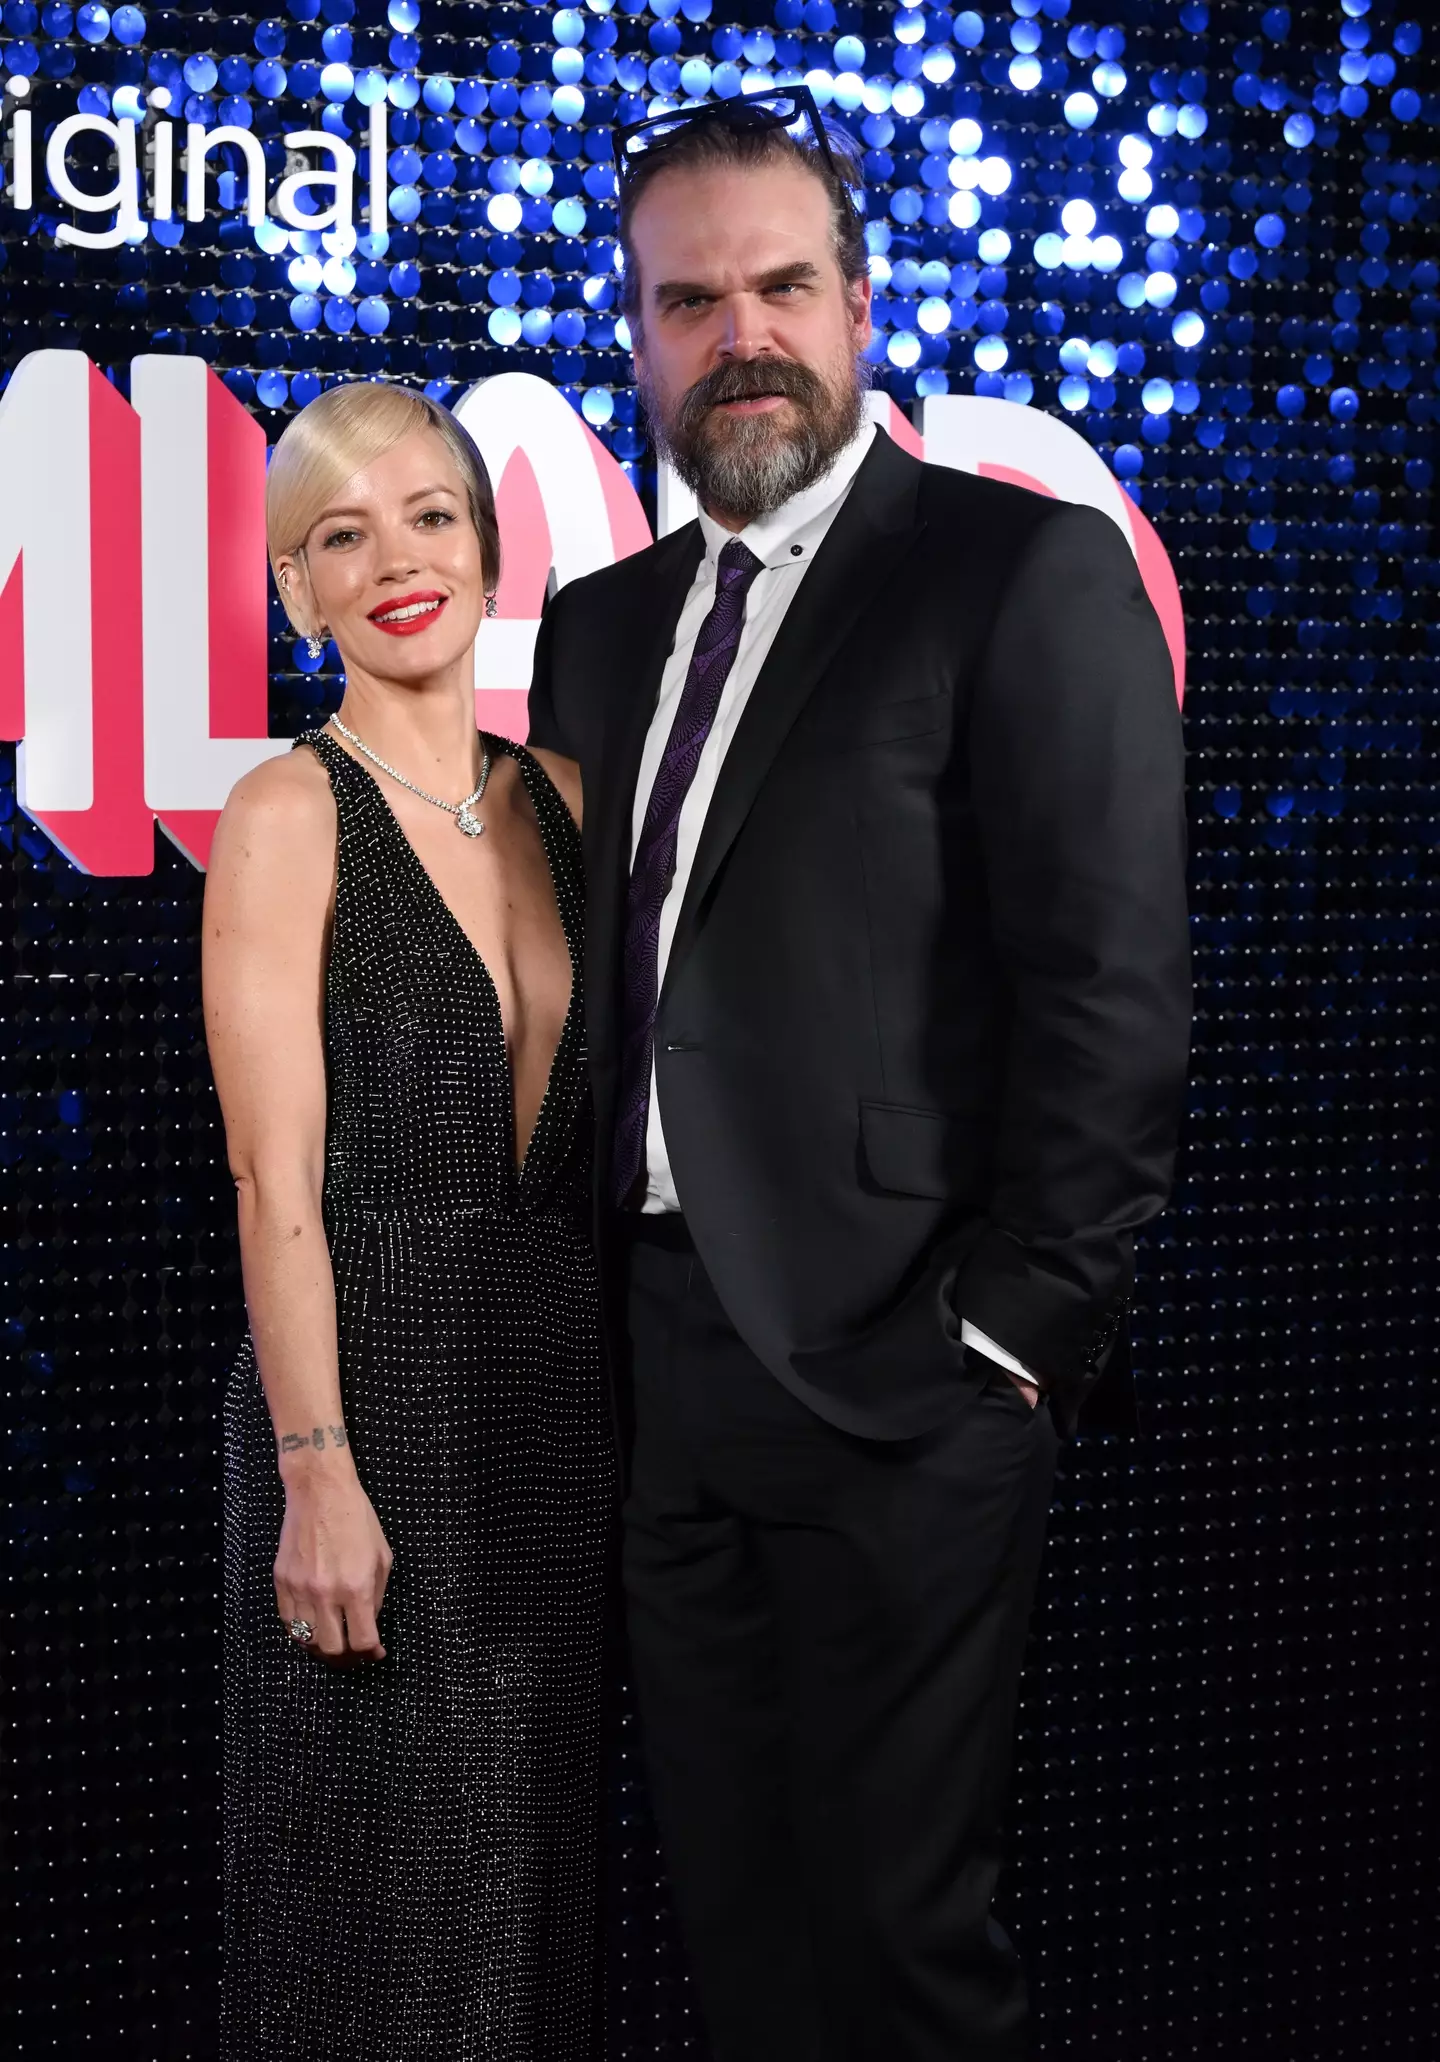 Lily Allen and David Harbour tied the knot in September 2020. (Karwai Tang/WireImage)